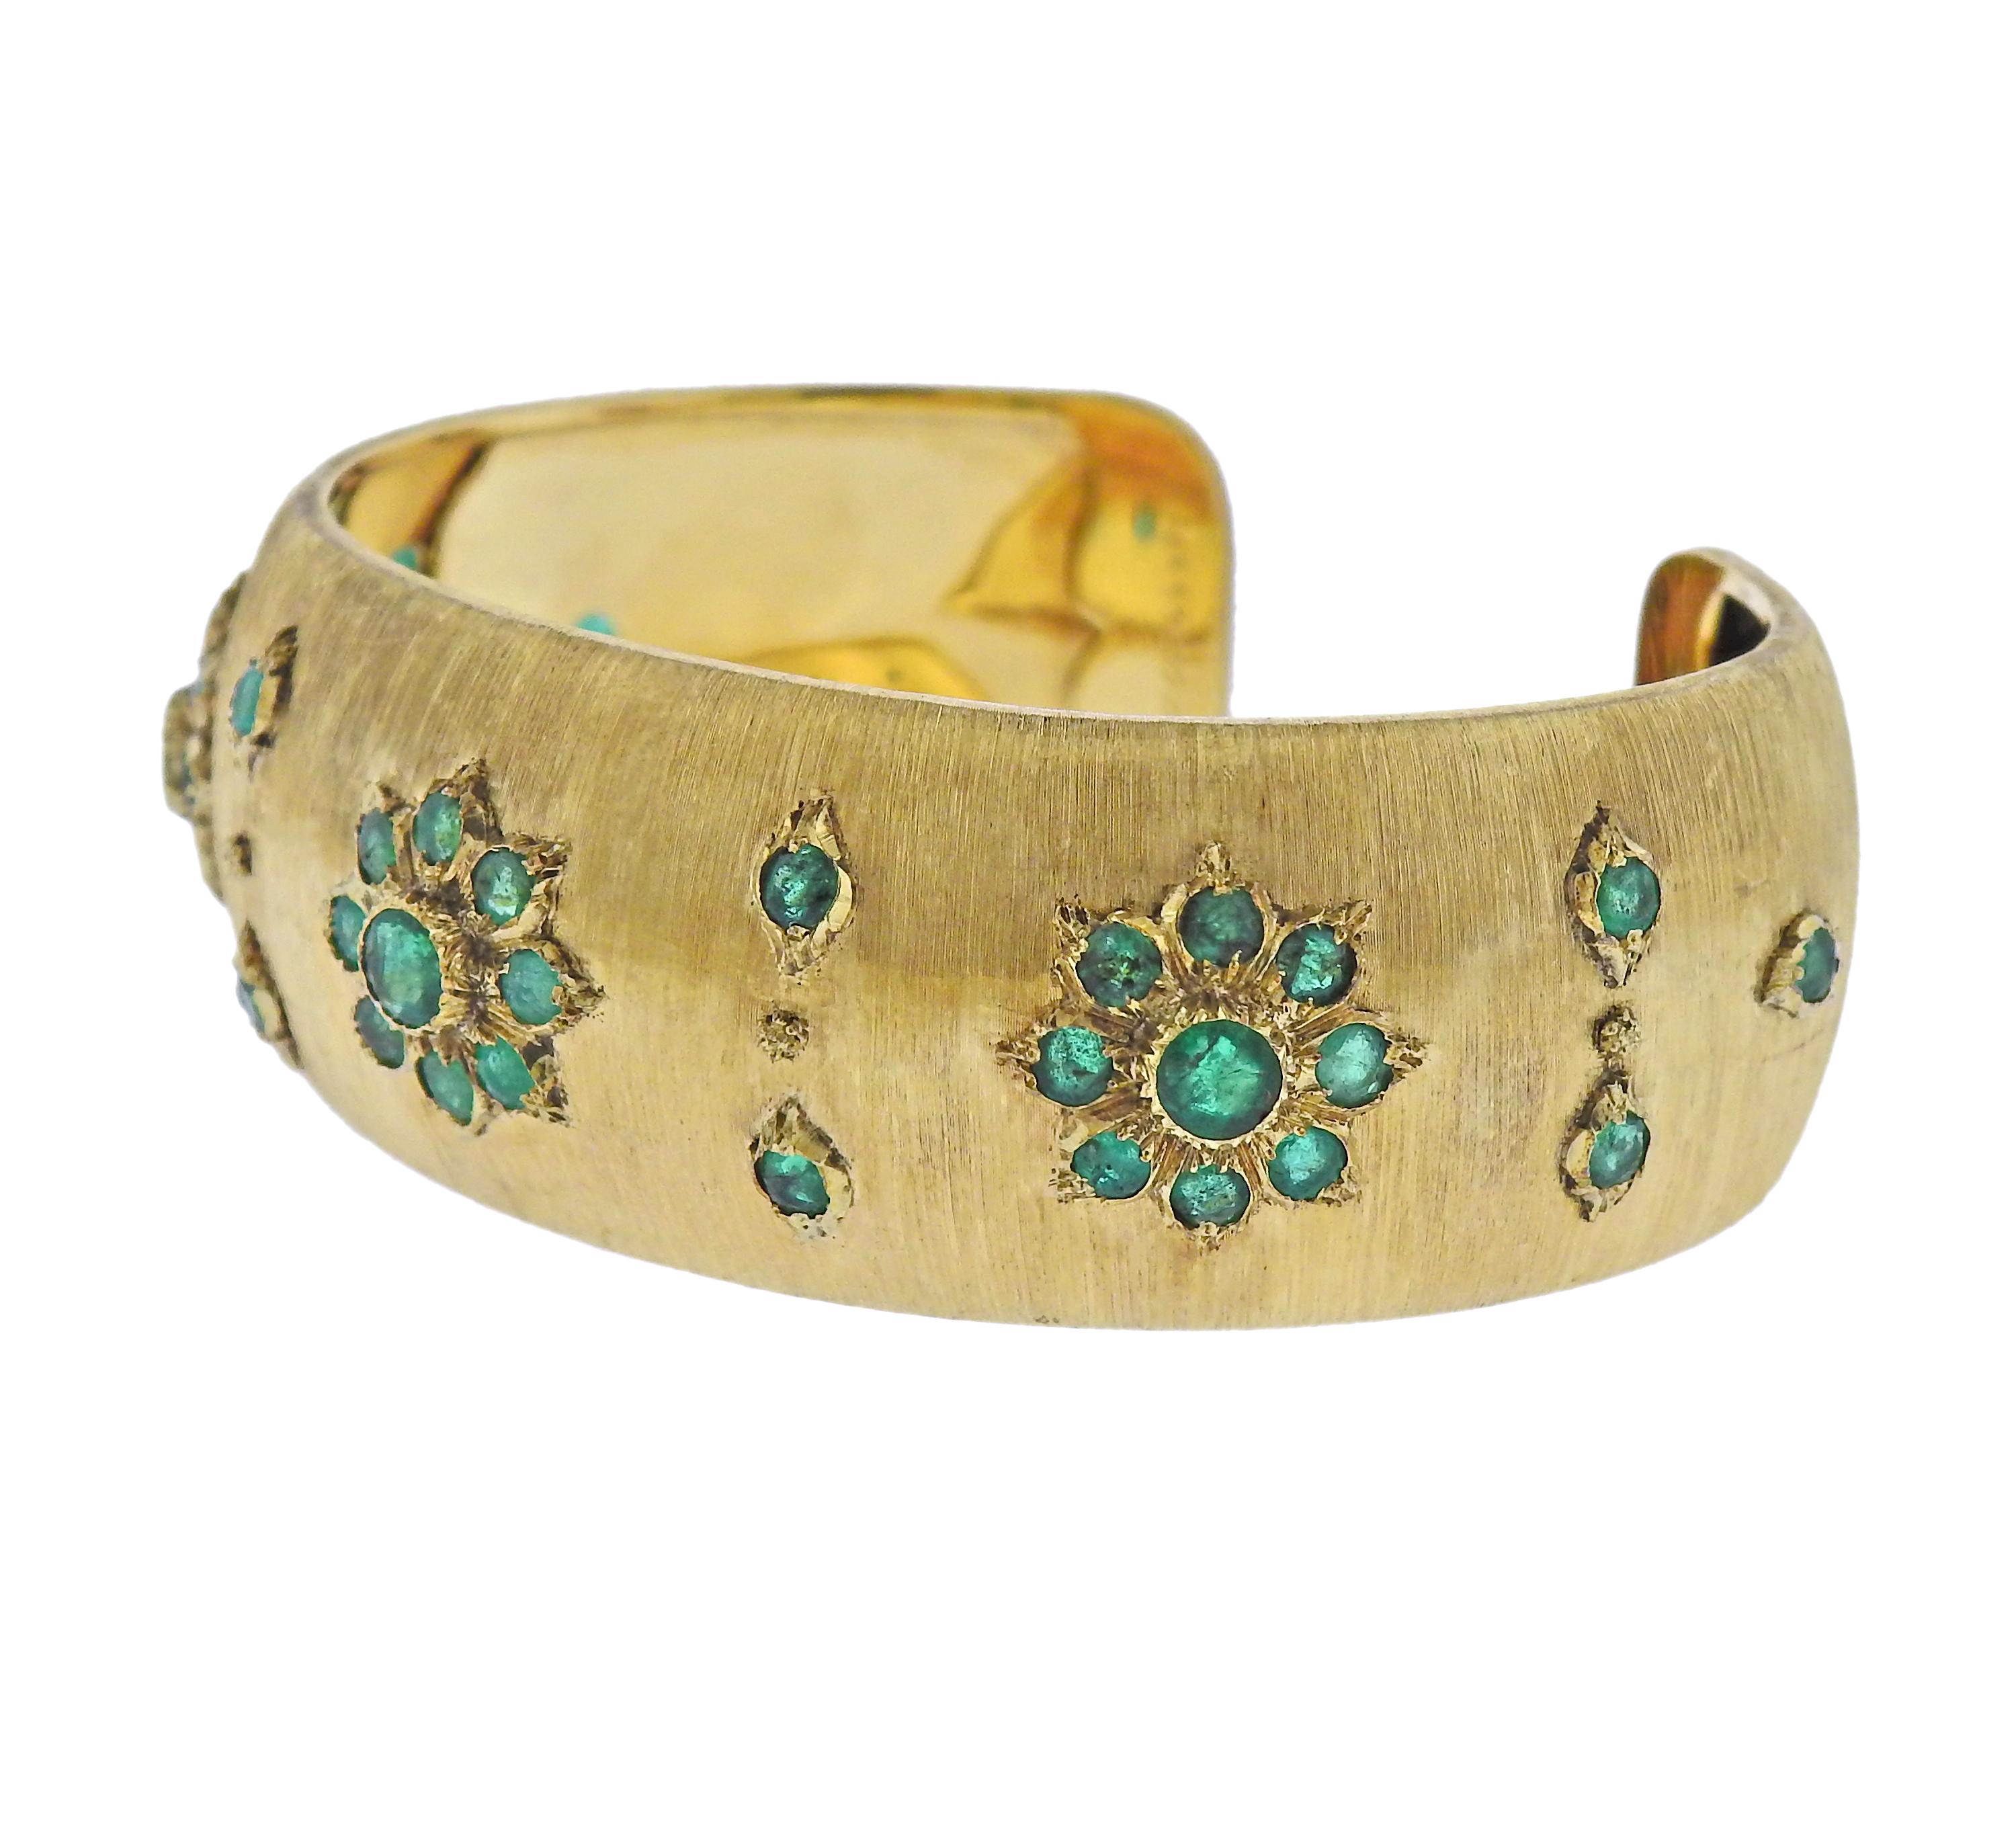 Classic 18k yellow gold cuff bracelet with emeralds, crafted by Buccellati. Bracelet will fit up to 7.25